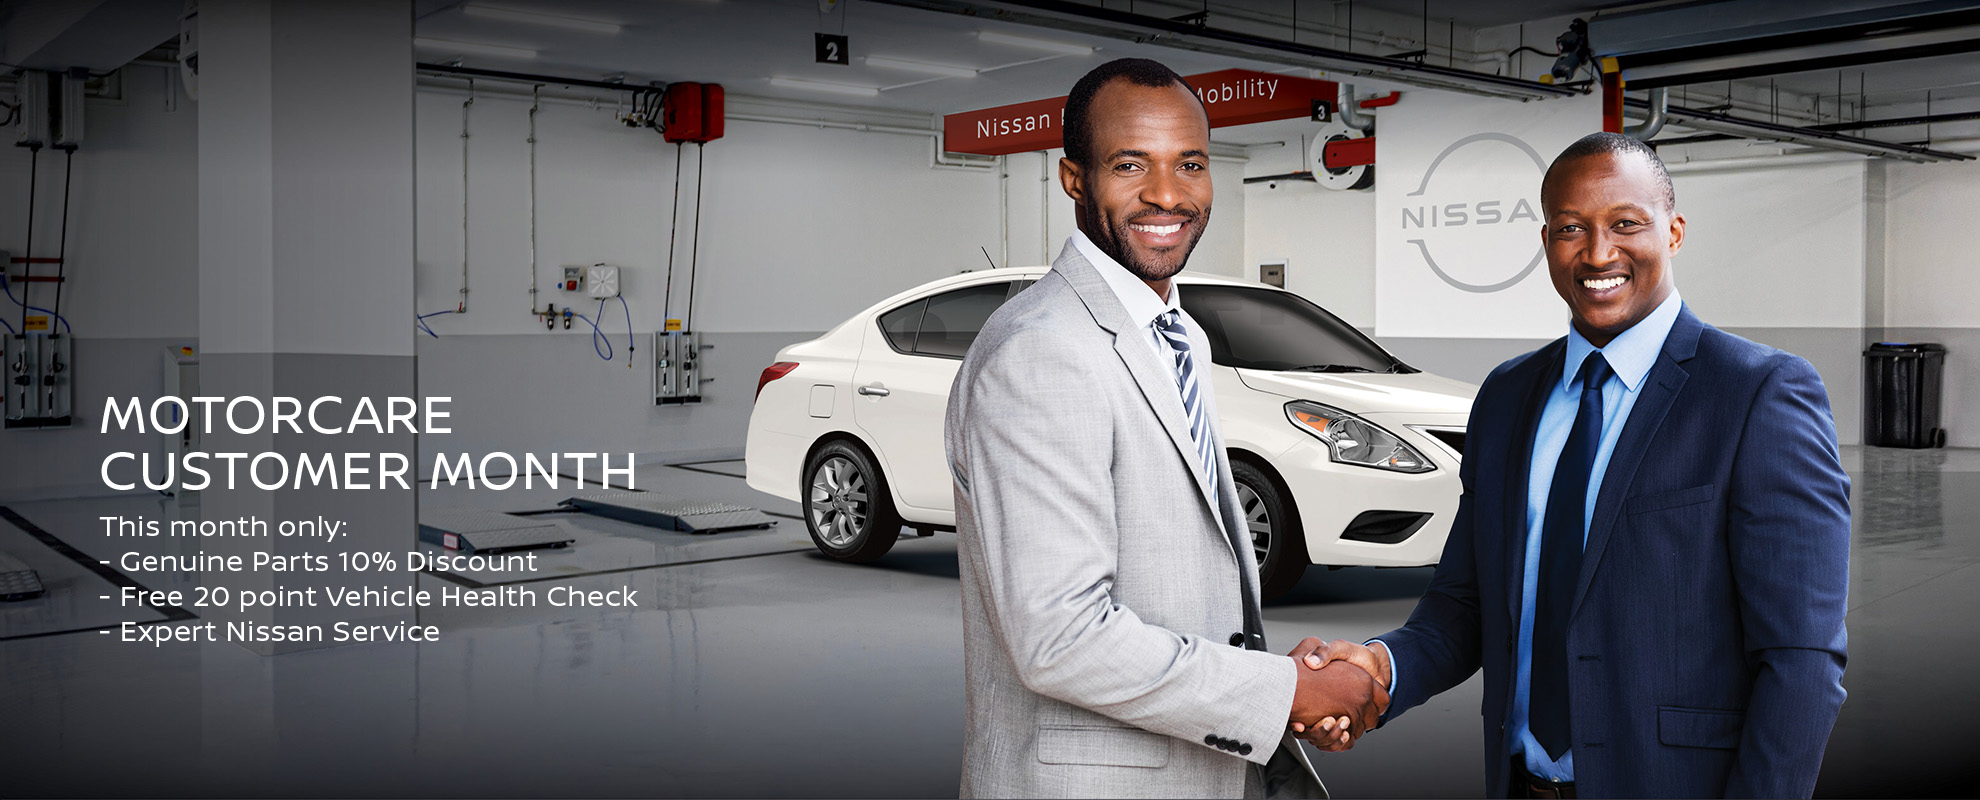 Celebrating Customer Month - Exploring Nissan Uganda's Exceptional Aftersales Services